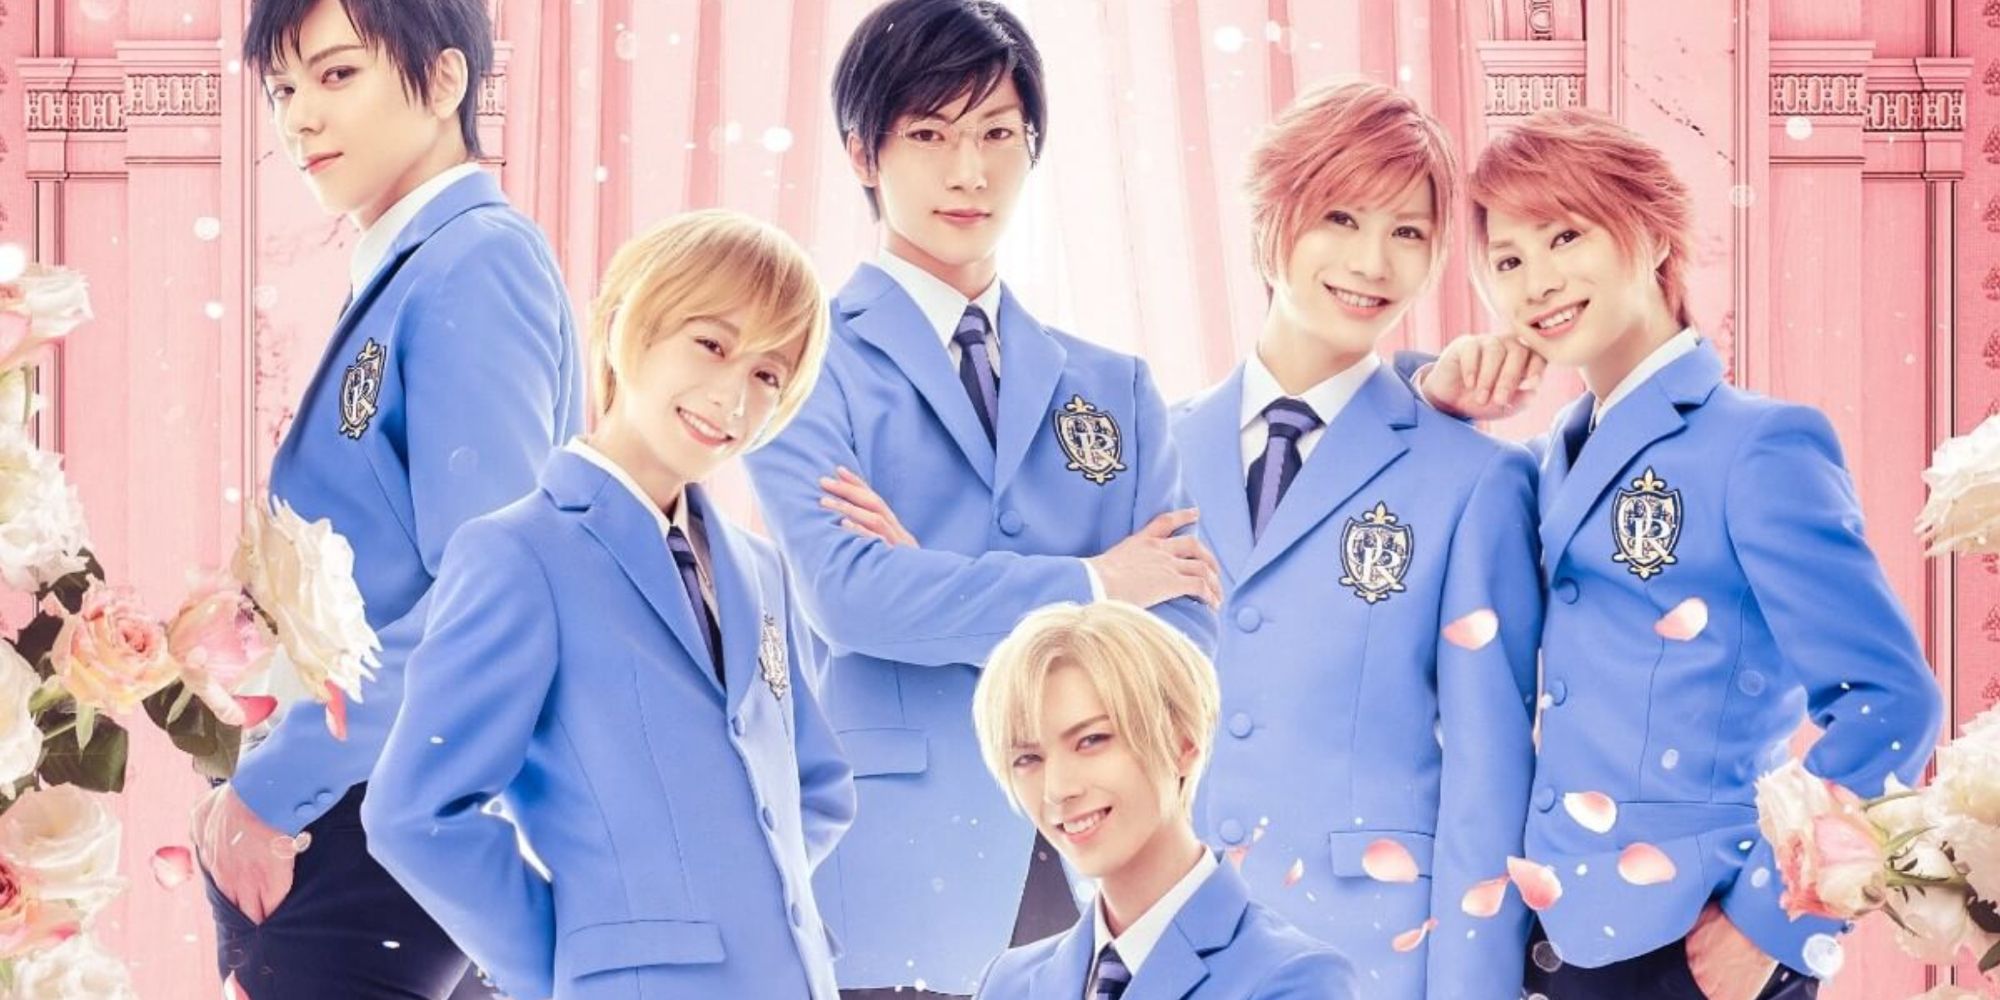 ouran high school host club live-action cast